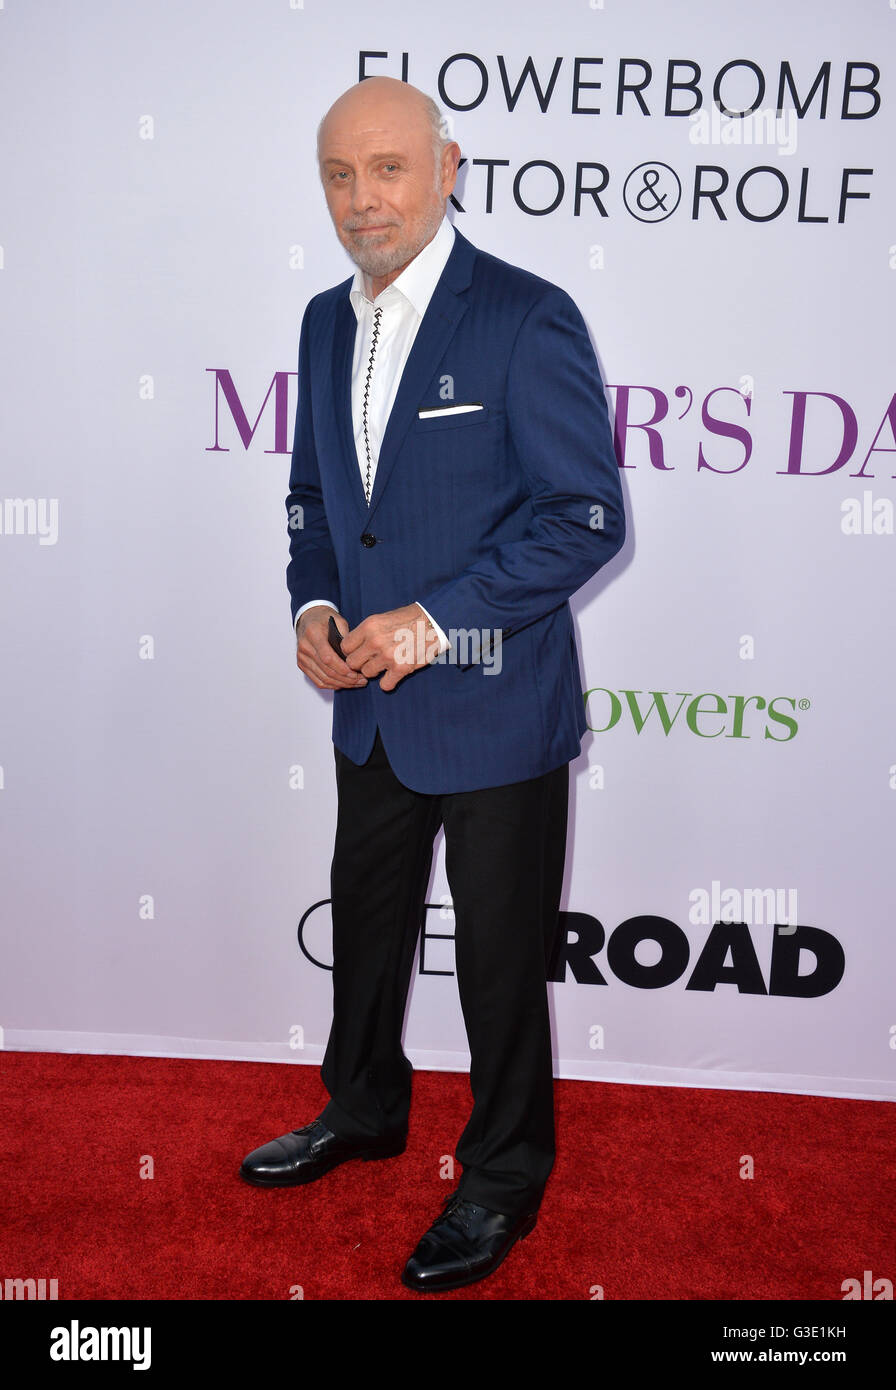 LOS ANGELES, CA. April 13, 2016: Actor Hector Elizondo at the world premiere of 'Mother's Day' at the TCL Chinese Theatre, Hollywood. Stock Photo